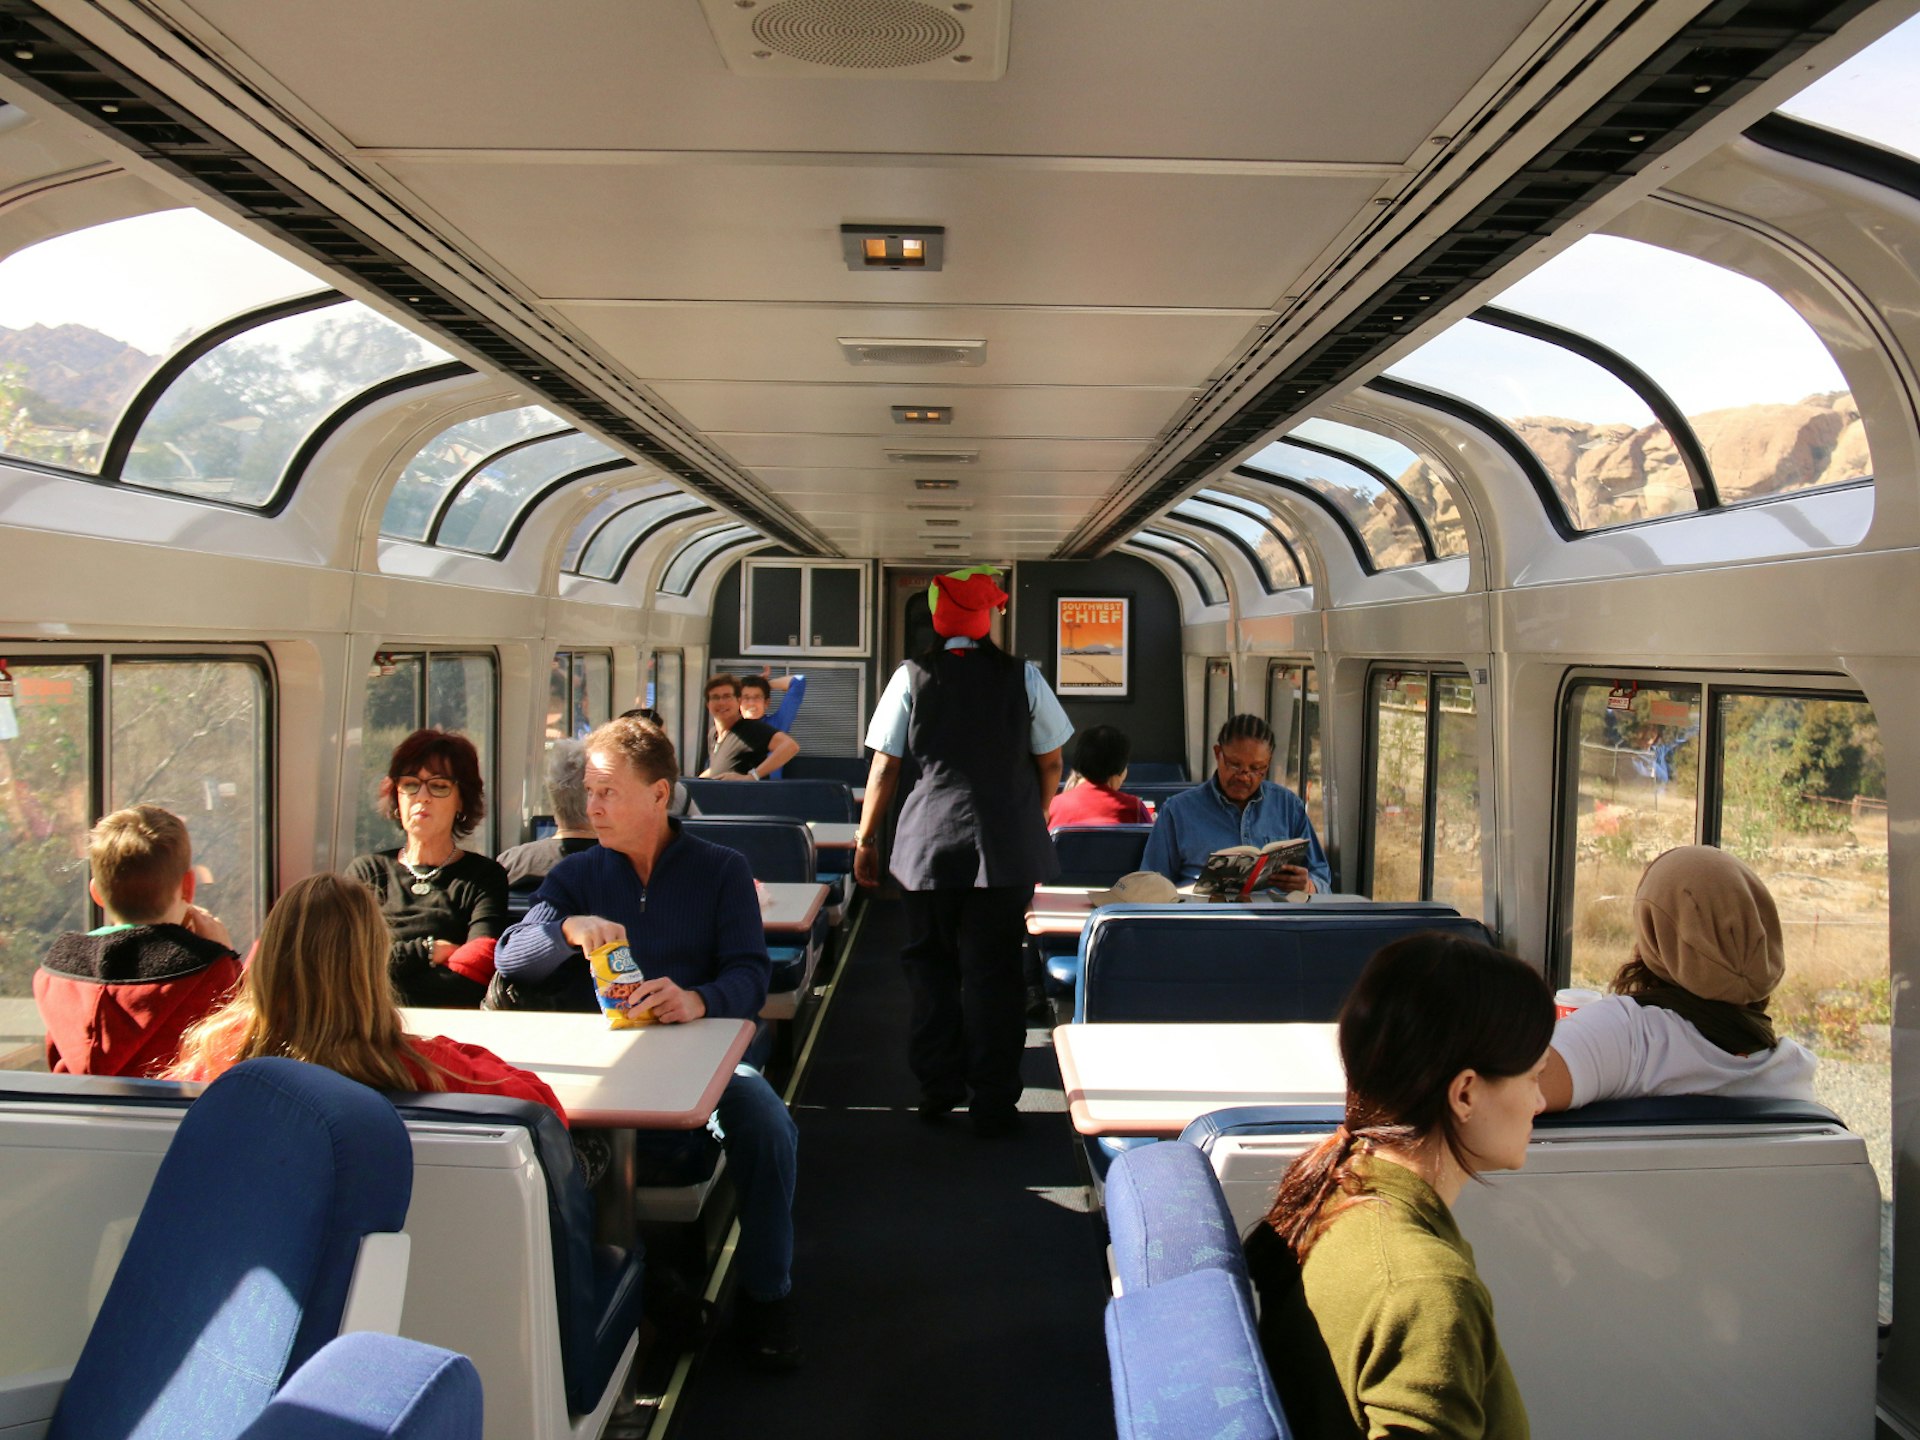 People sat at a series of tables in a train carriage with large windows, which curve partially over the roof